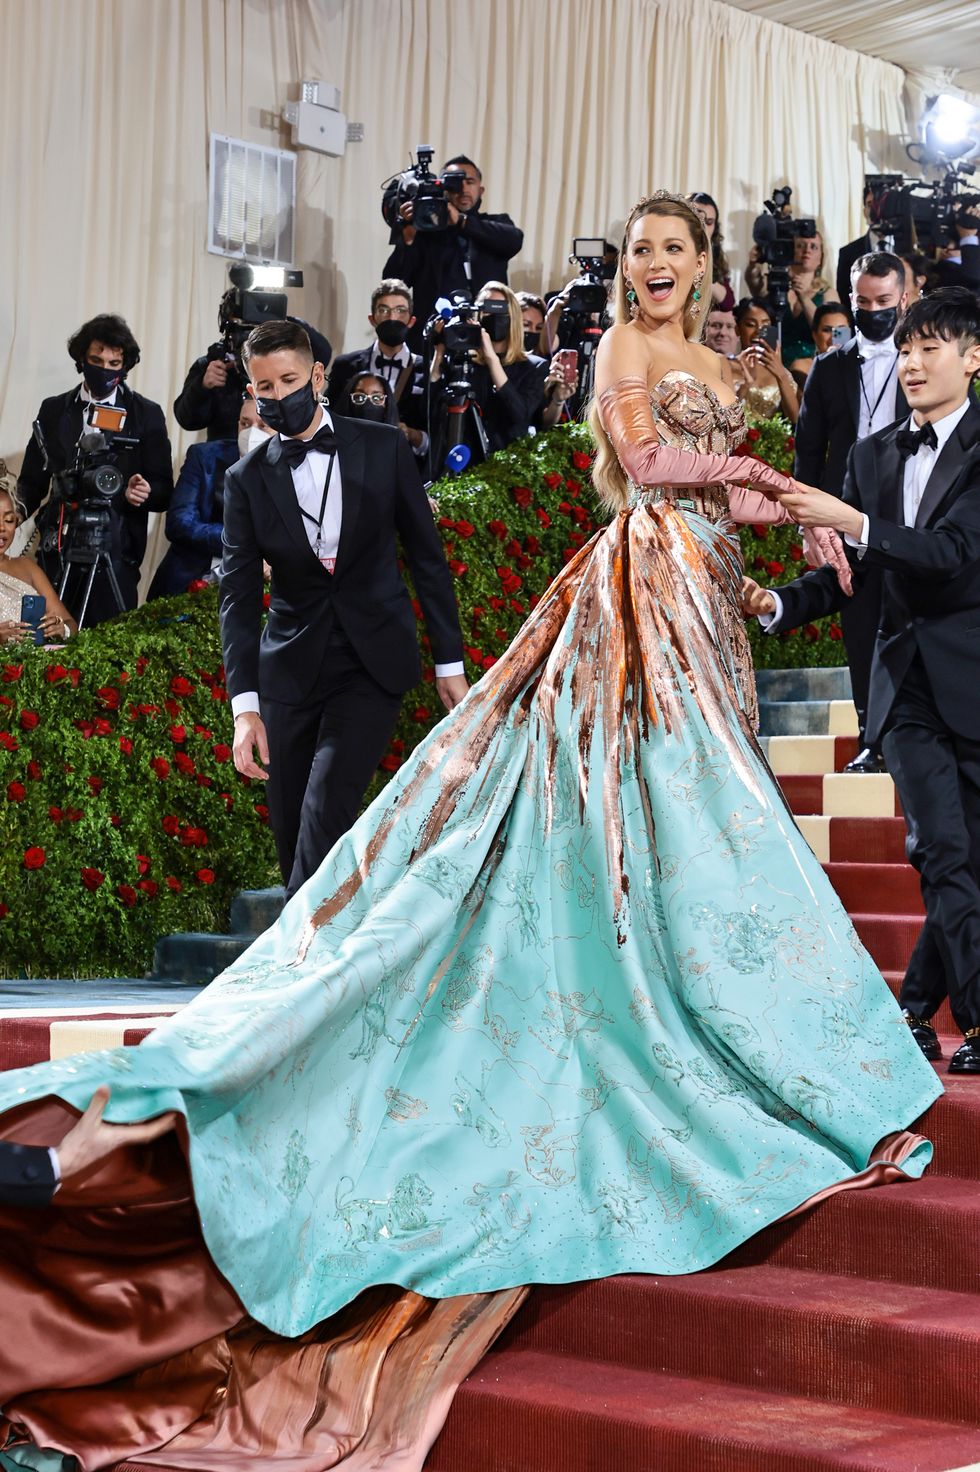 Why Blake Lively Isn't Attending This Year's Met Gala